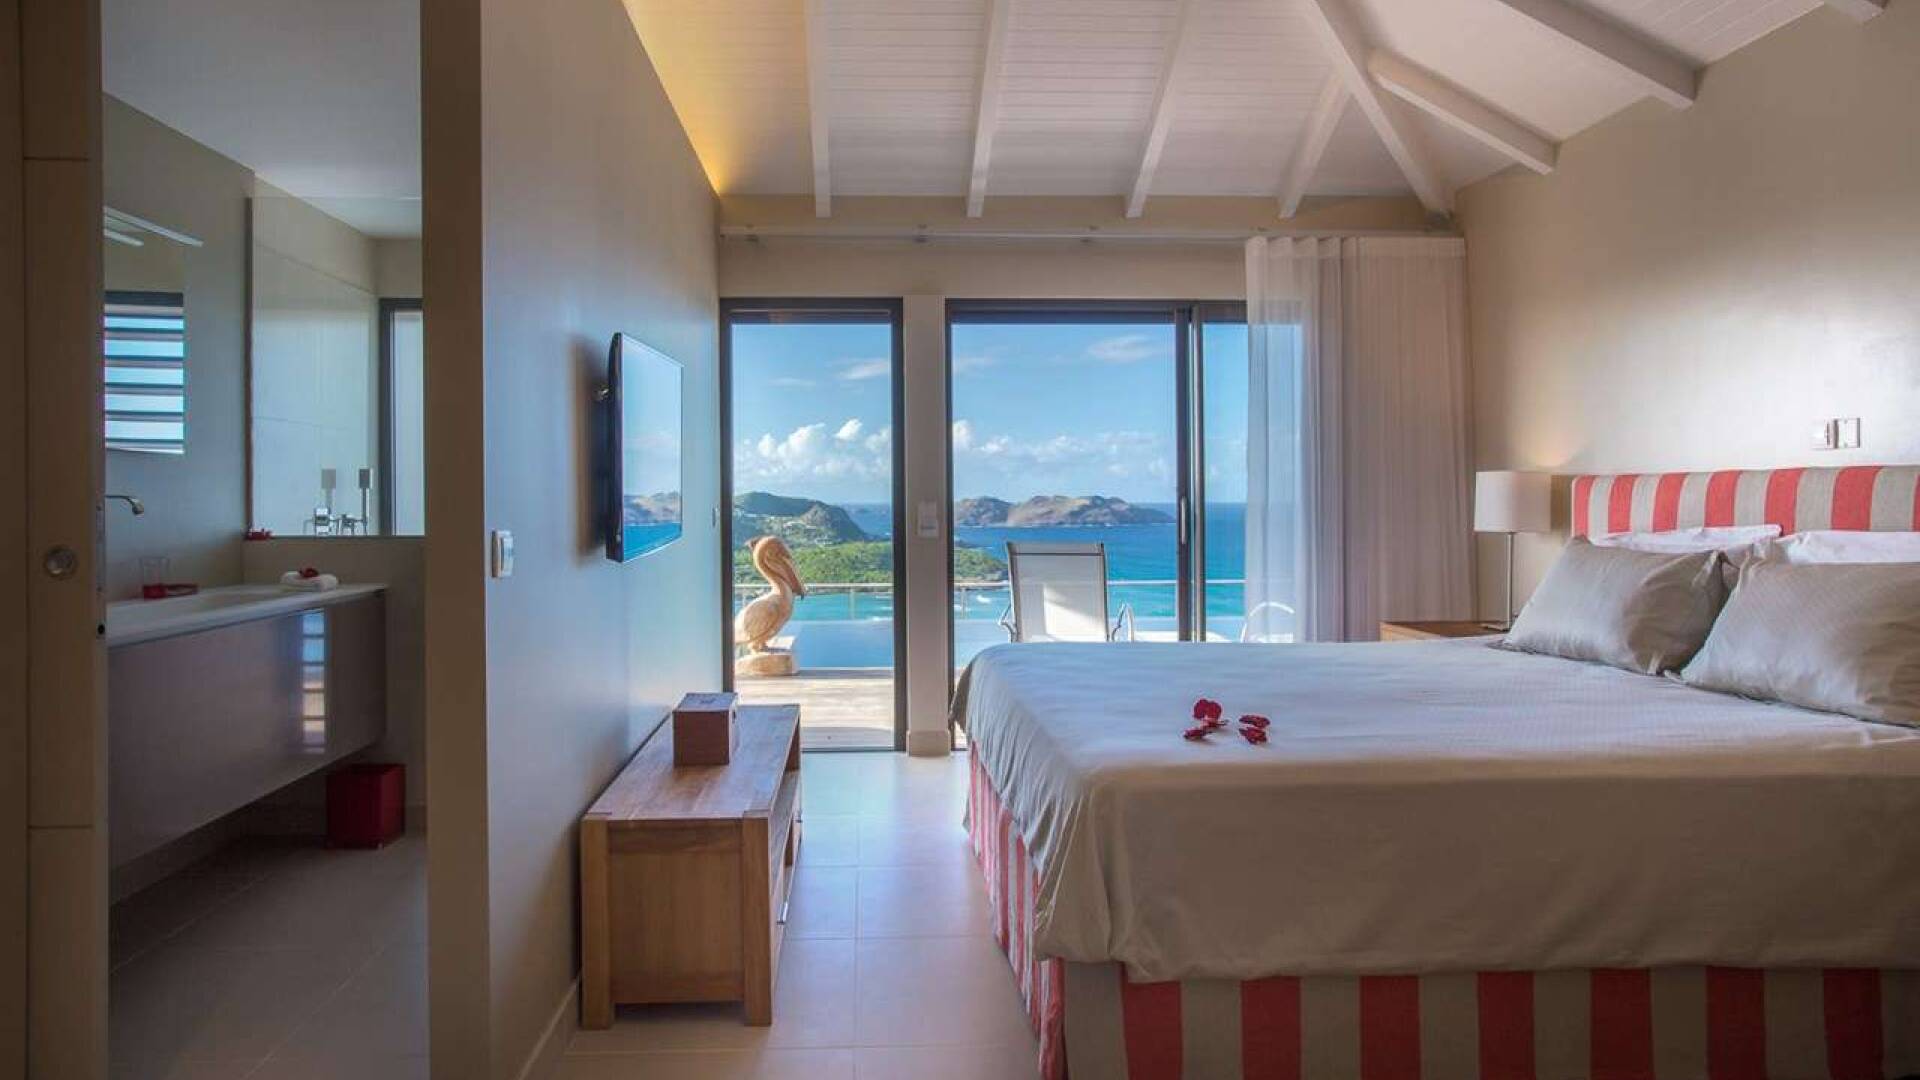 Bedroom at WV IEW, St. Jean, St. Barthelemy